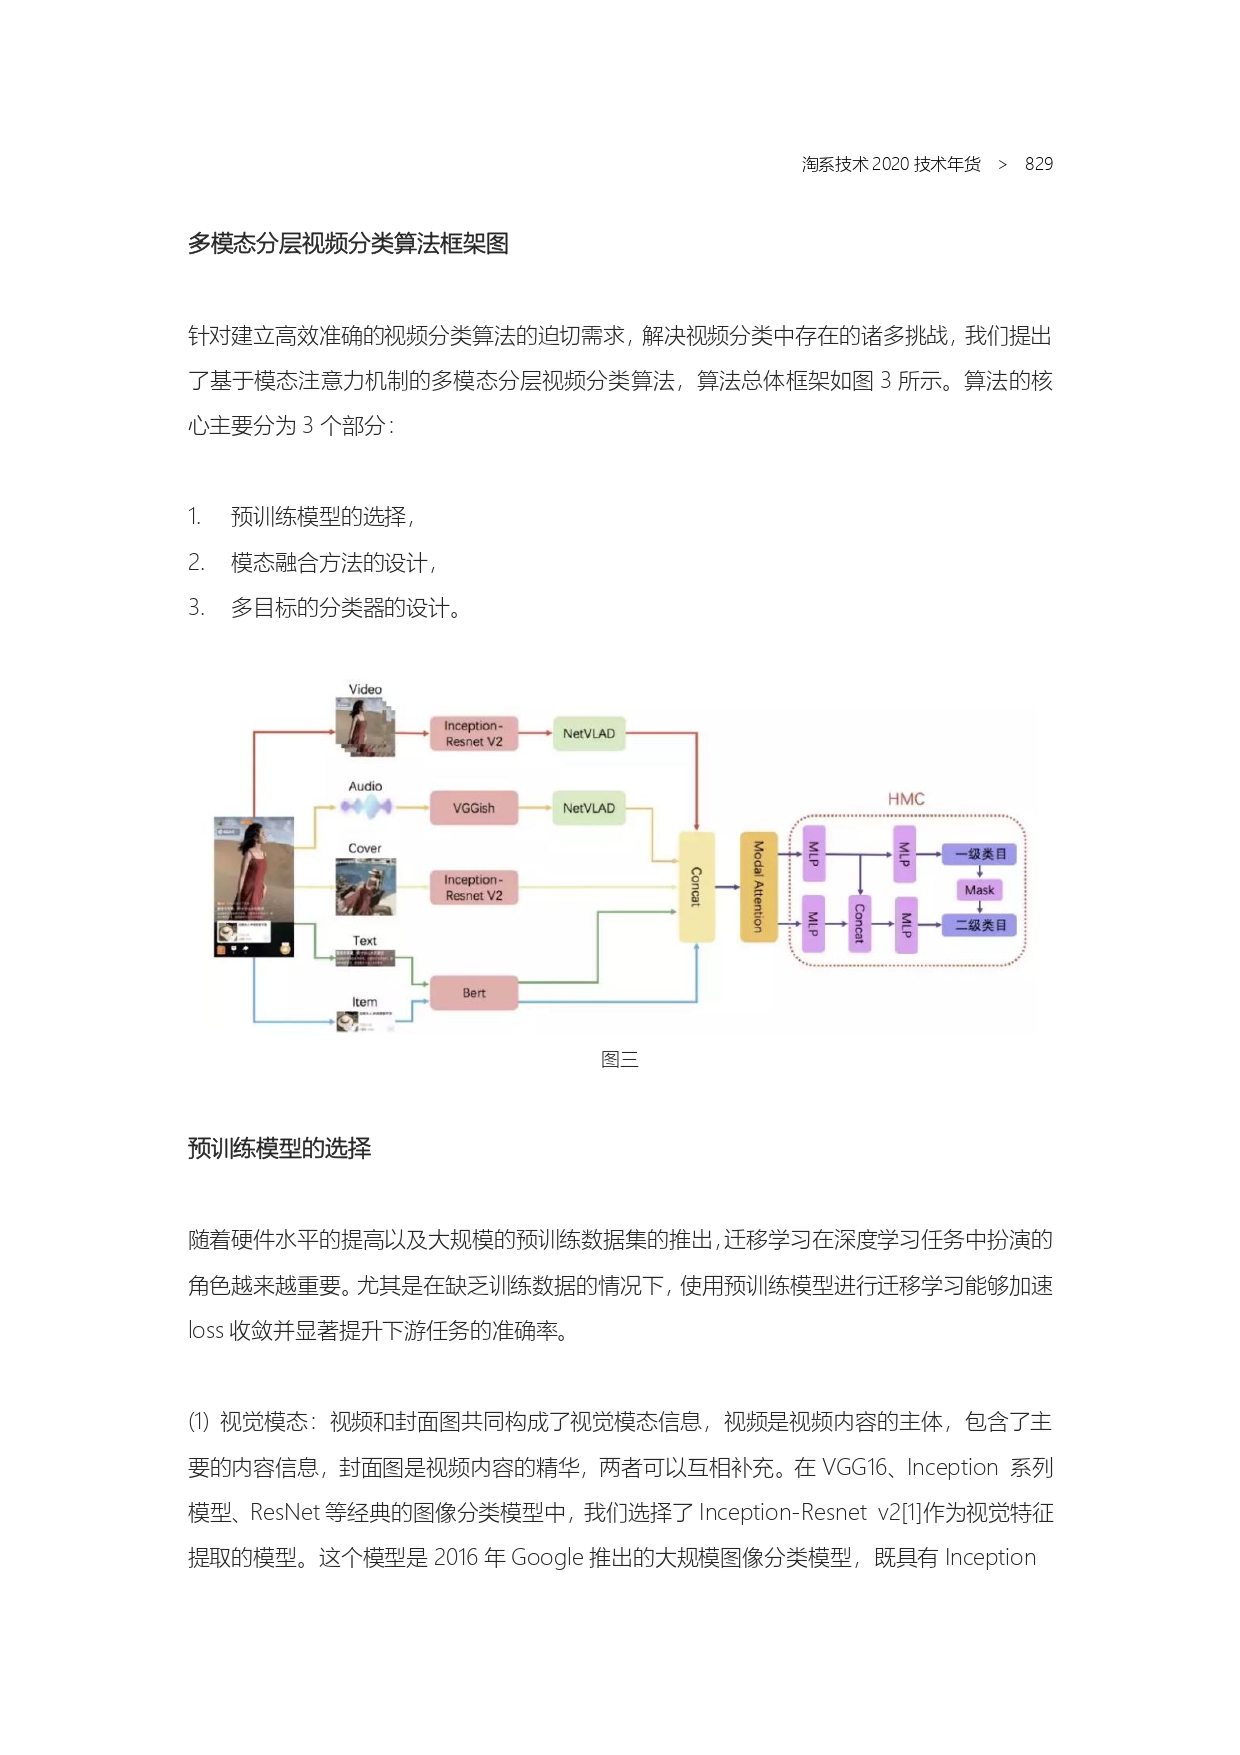 The Complete Works of Tao Technology 2020-571-1189-1-300_page-0259.jpg